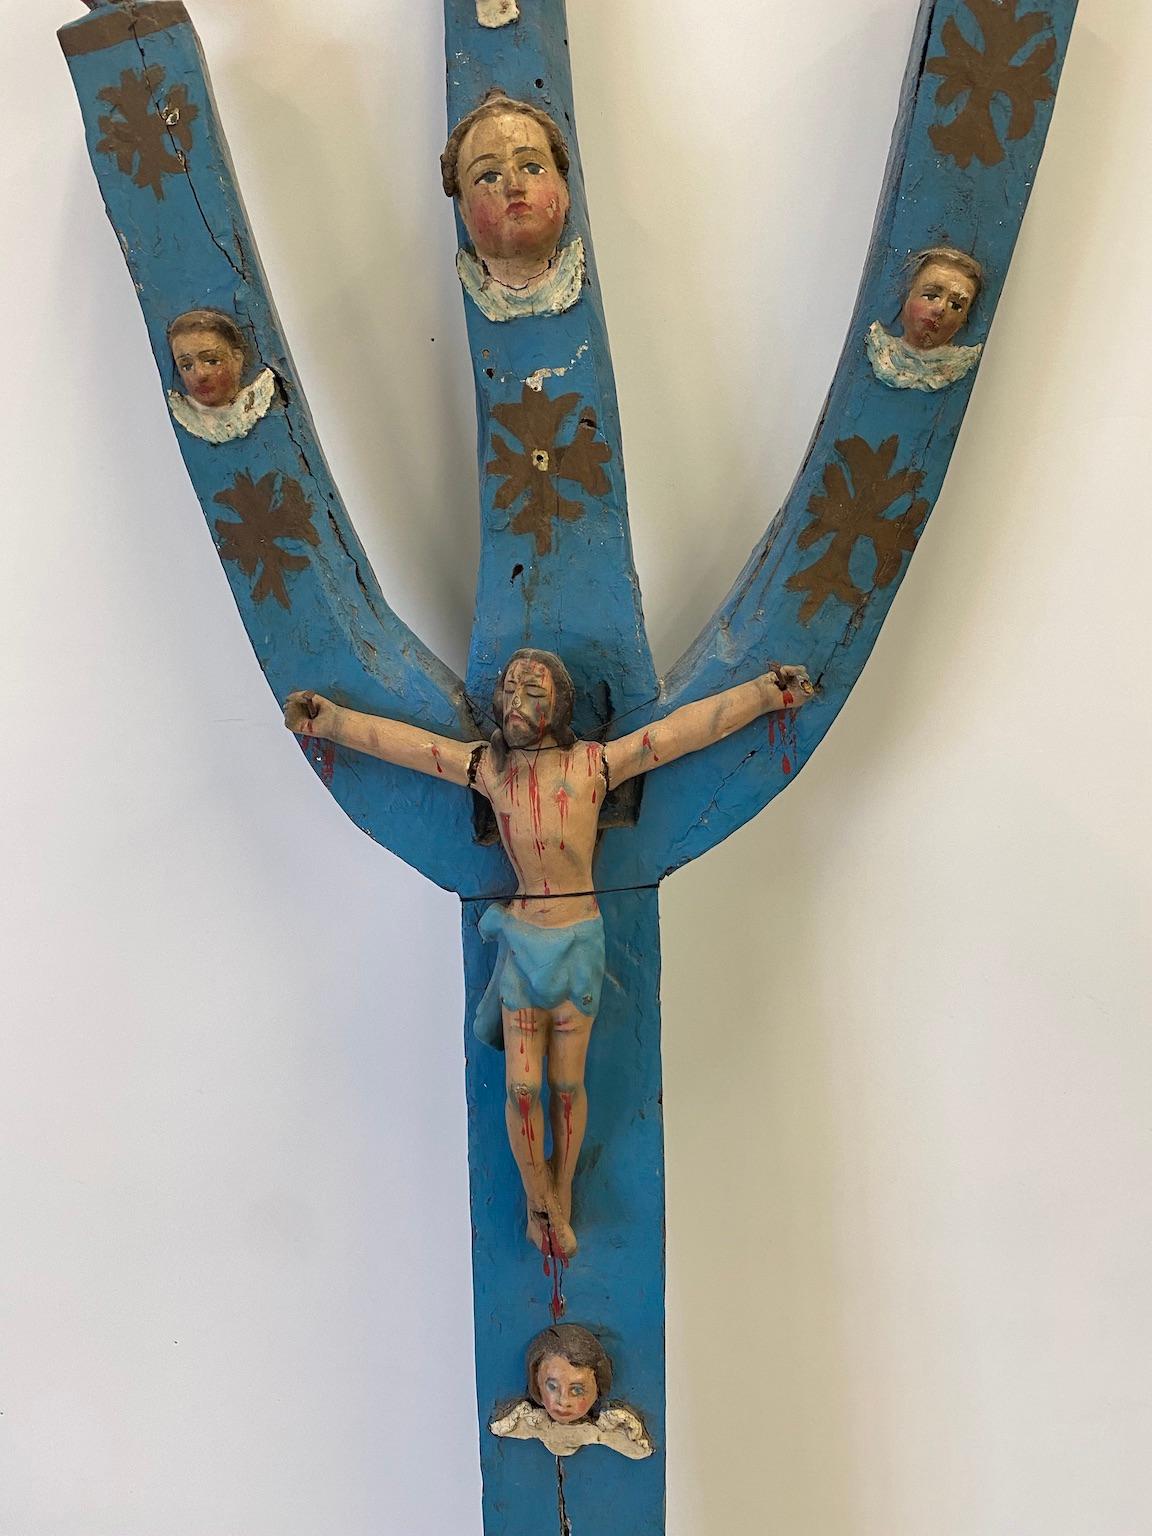 This carved wooden crucifix of Christ on a stylized tree form, is Guatemalan or Mexican, likely created in the late 1800s by a naive artist of the period, 19th century. It has been painted, and perhaps repainted, through the years. This devotional